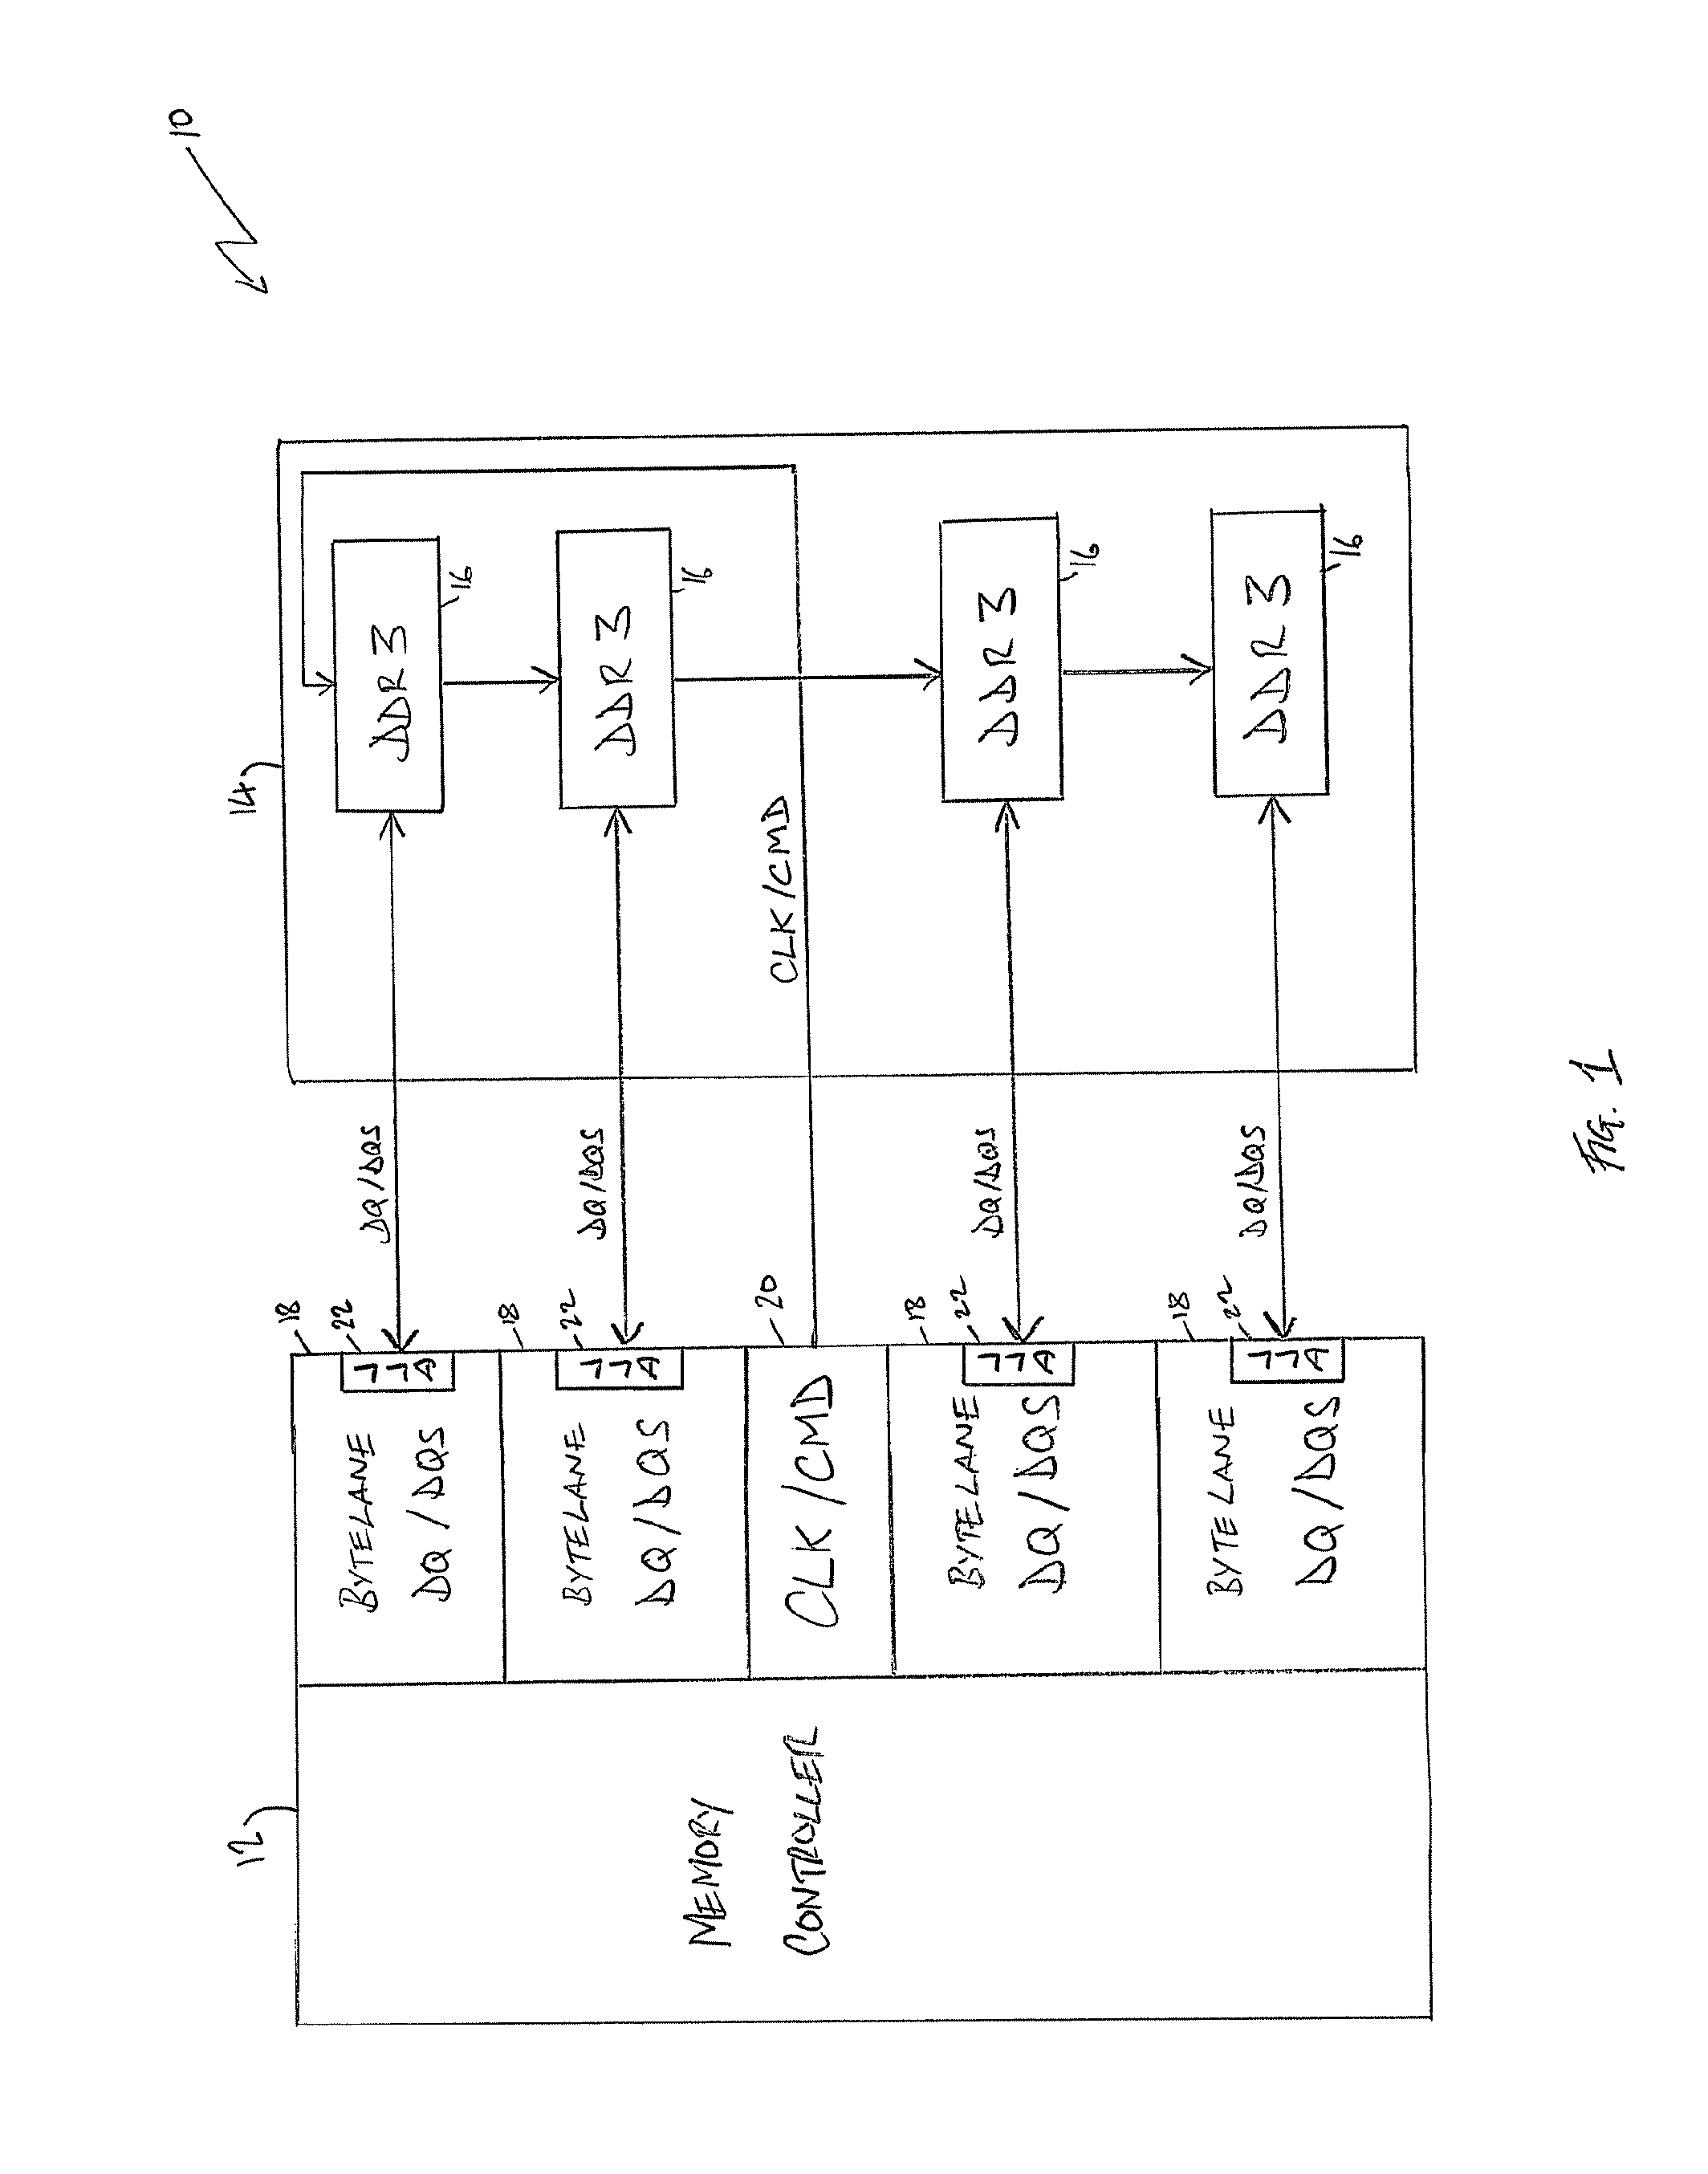 Data signal receiver and method of calibrating a data signal receiver